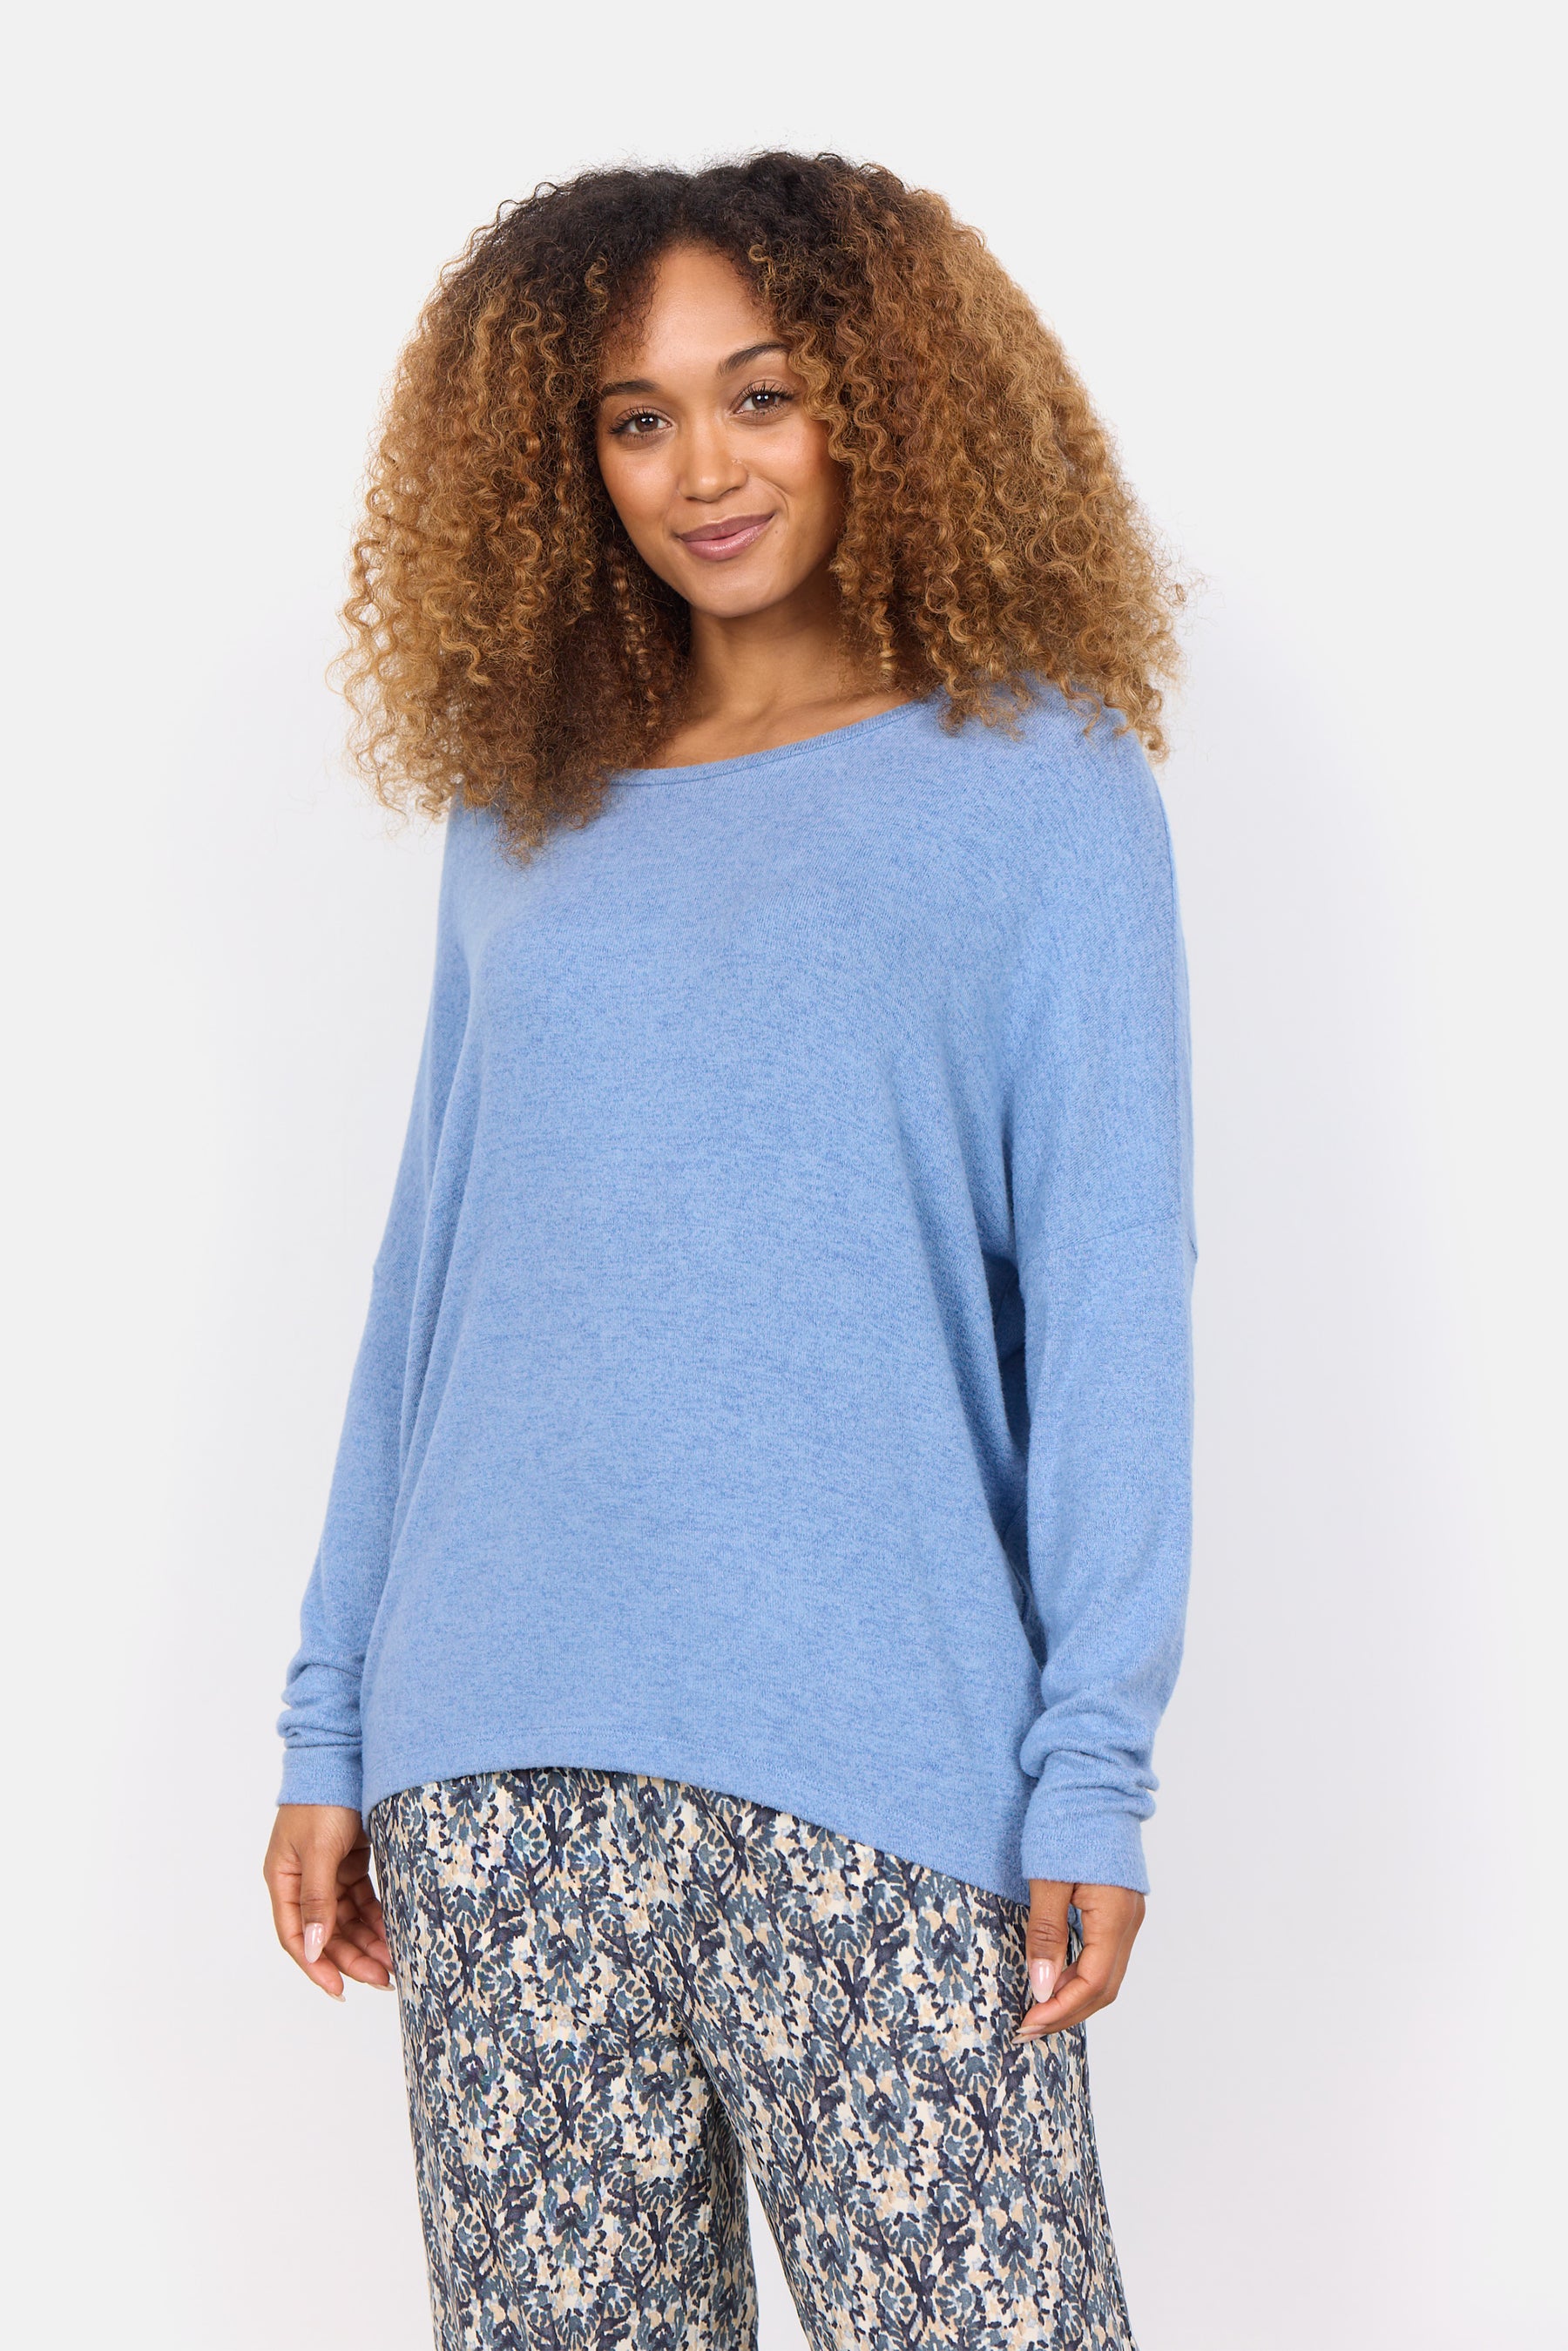 Soya Concept Sweater 24788-BLUE